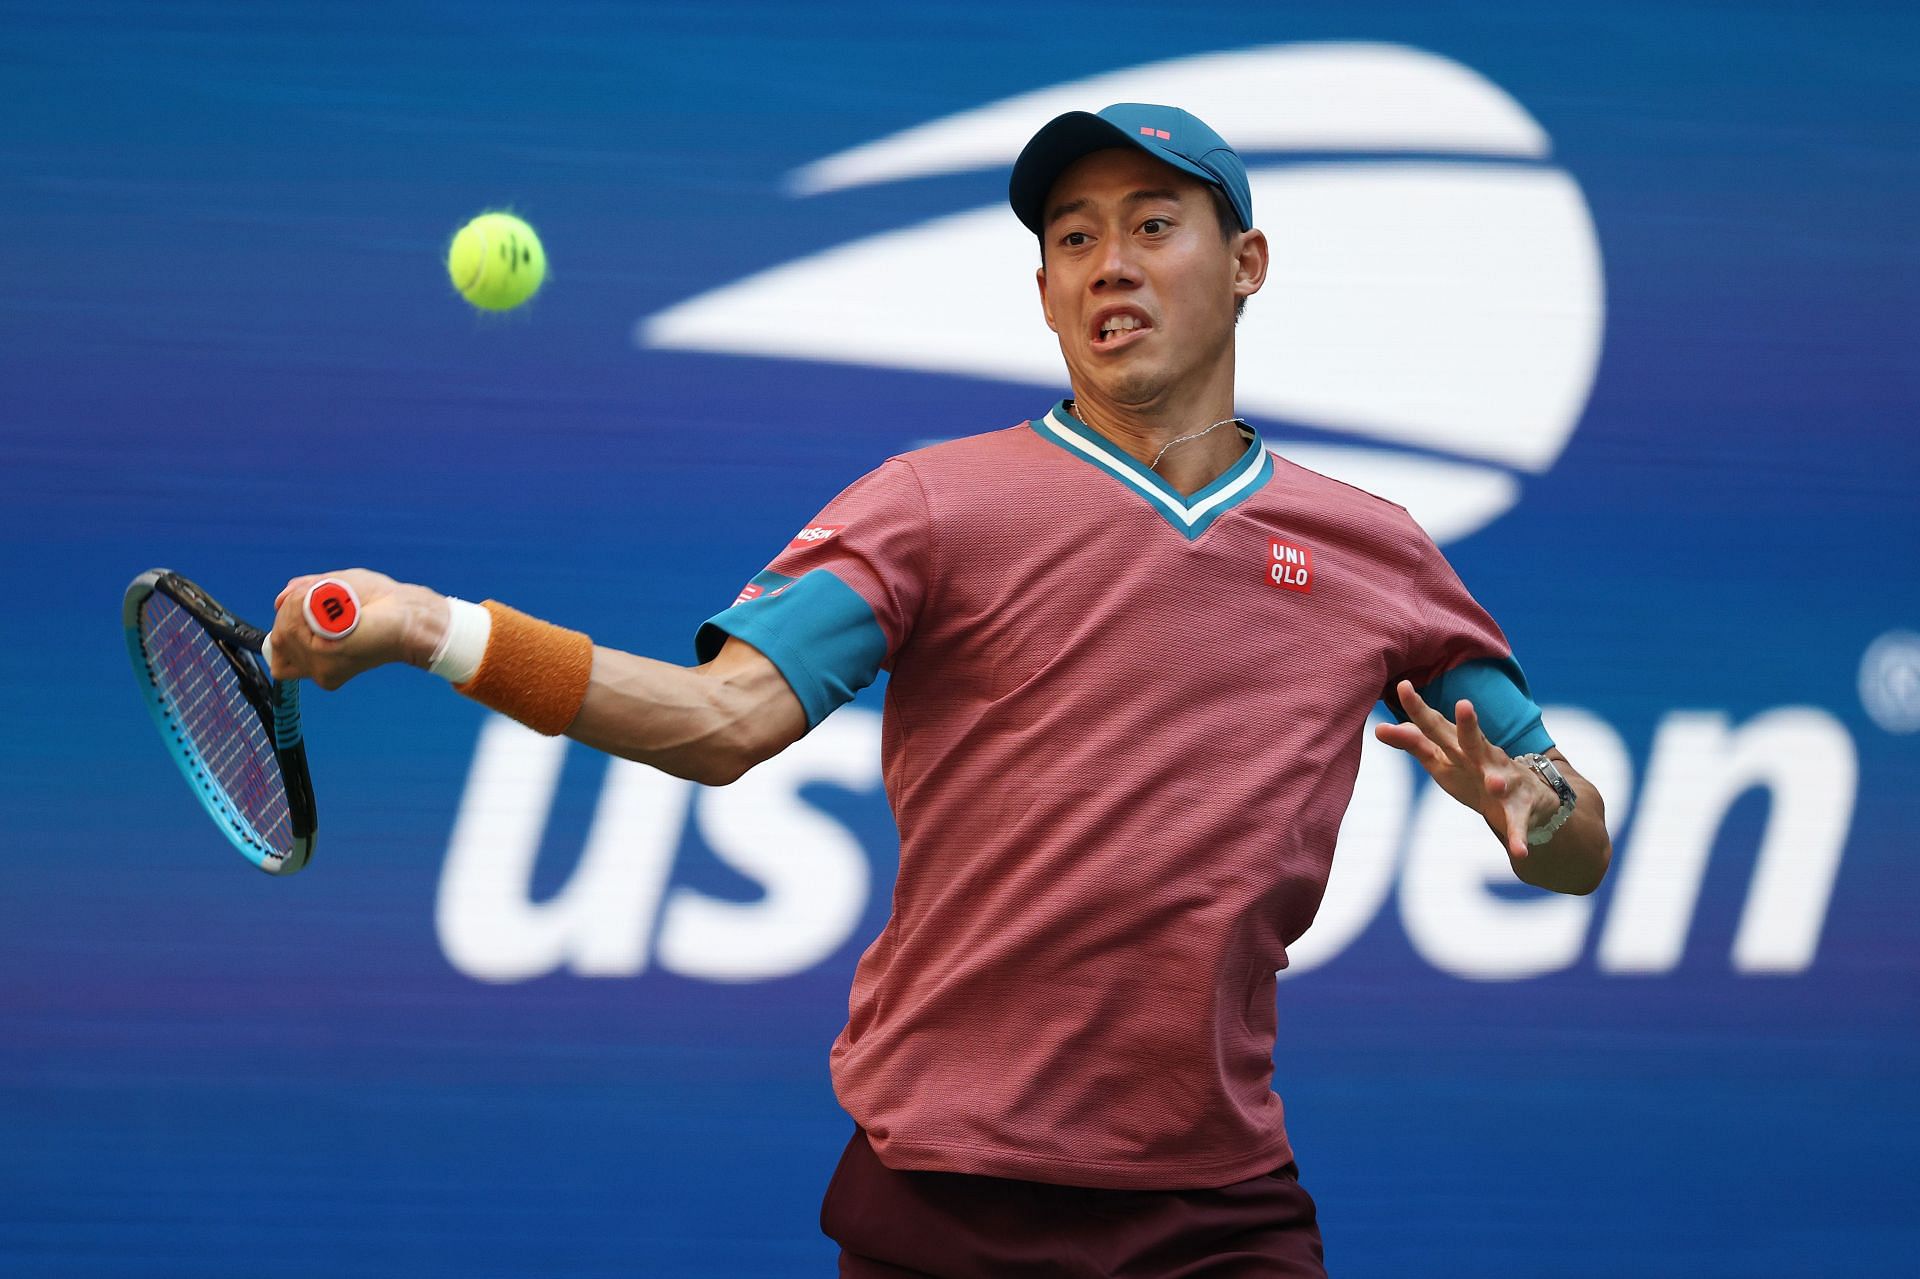 Kei Nishikori has undergone hip surgery and is looking to be back in six months